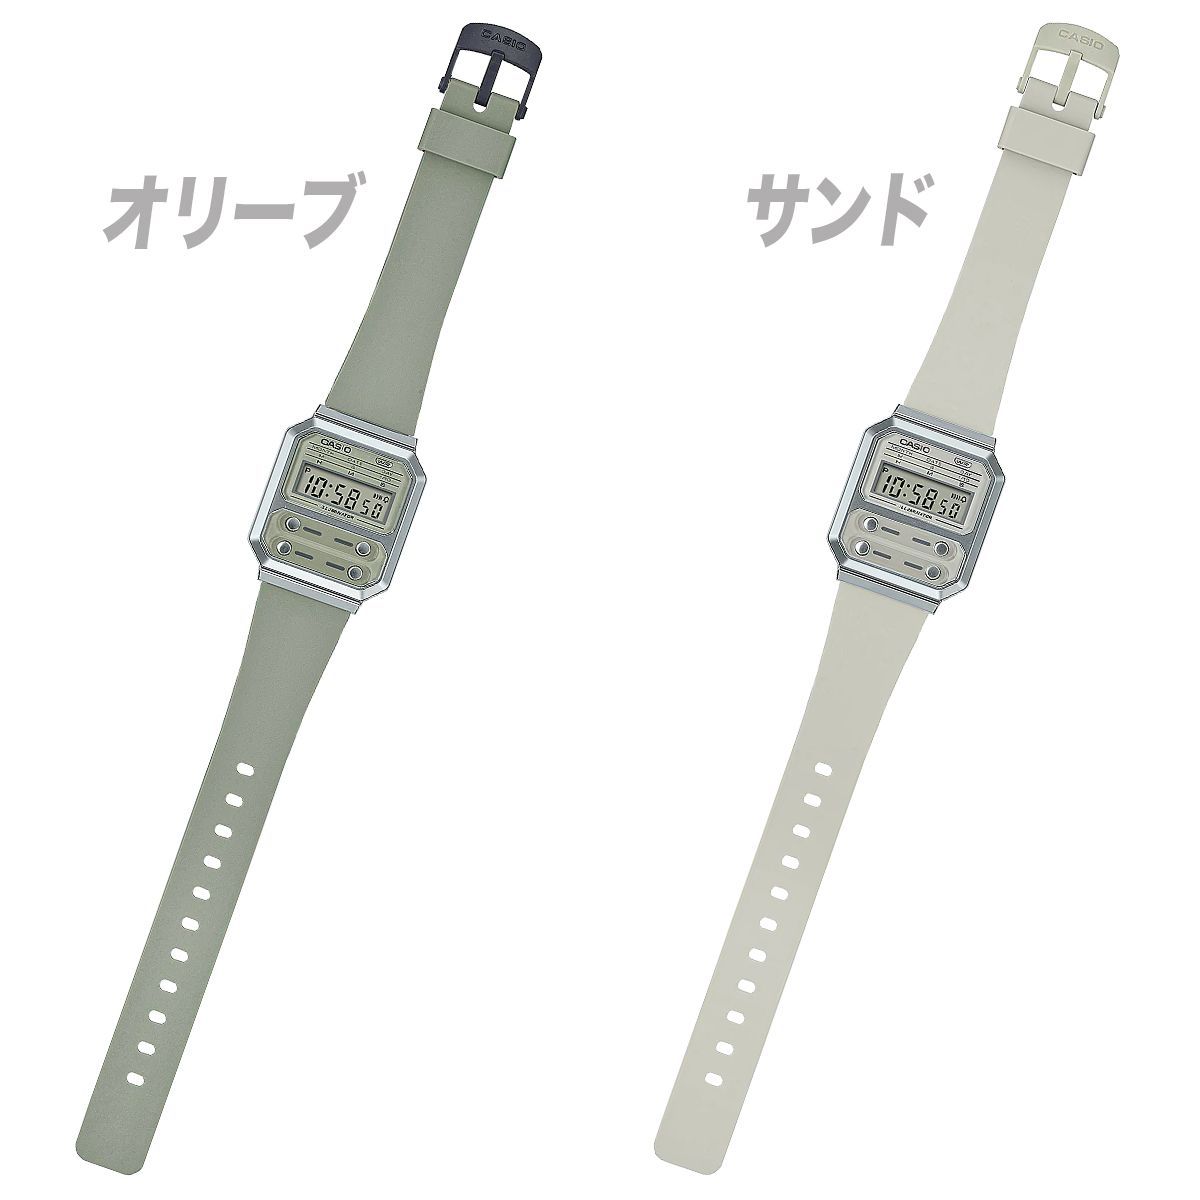 CASIO カシオ Edgy Collection A100WEF-3A A100WEF-8A エイリアン 復刻